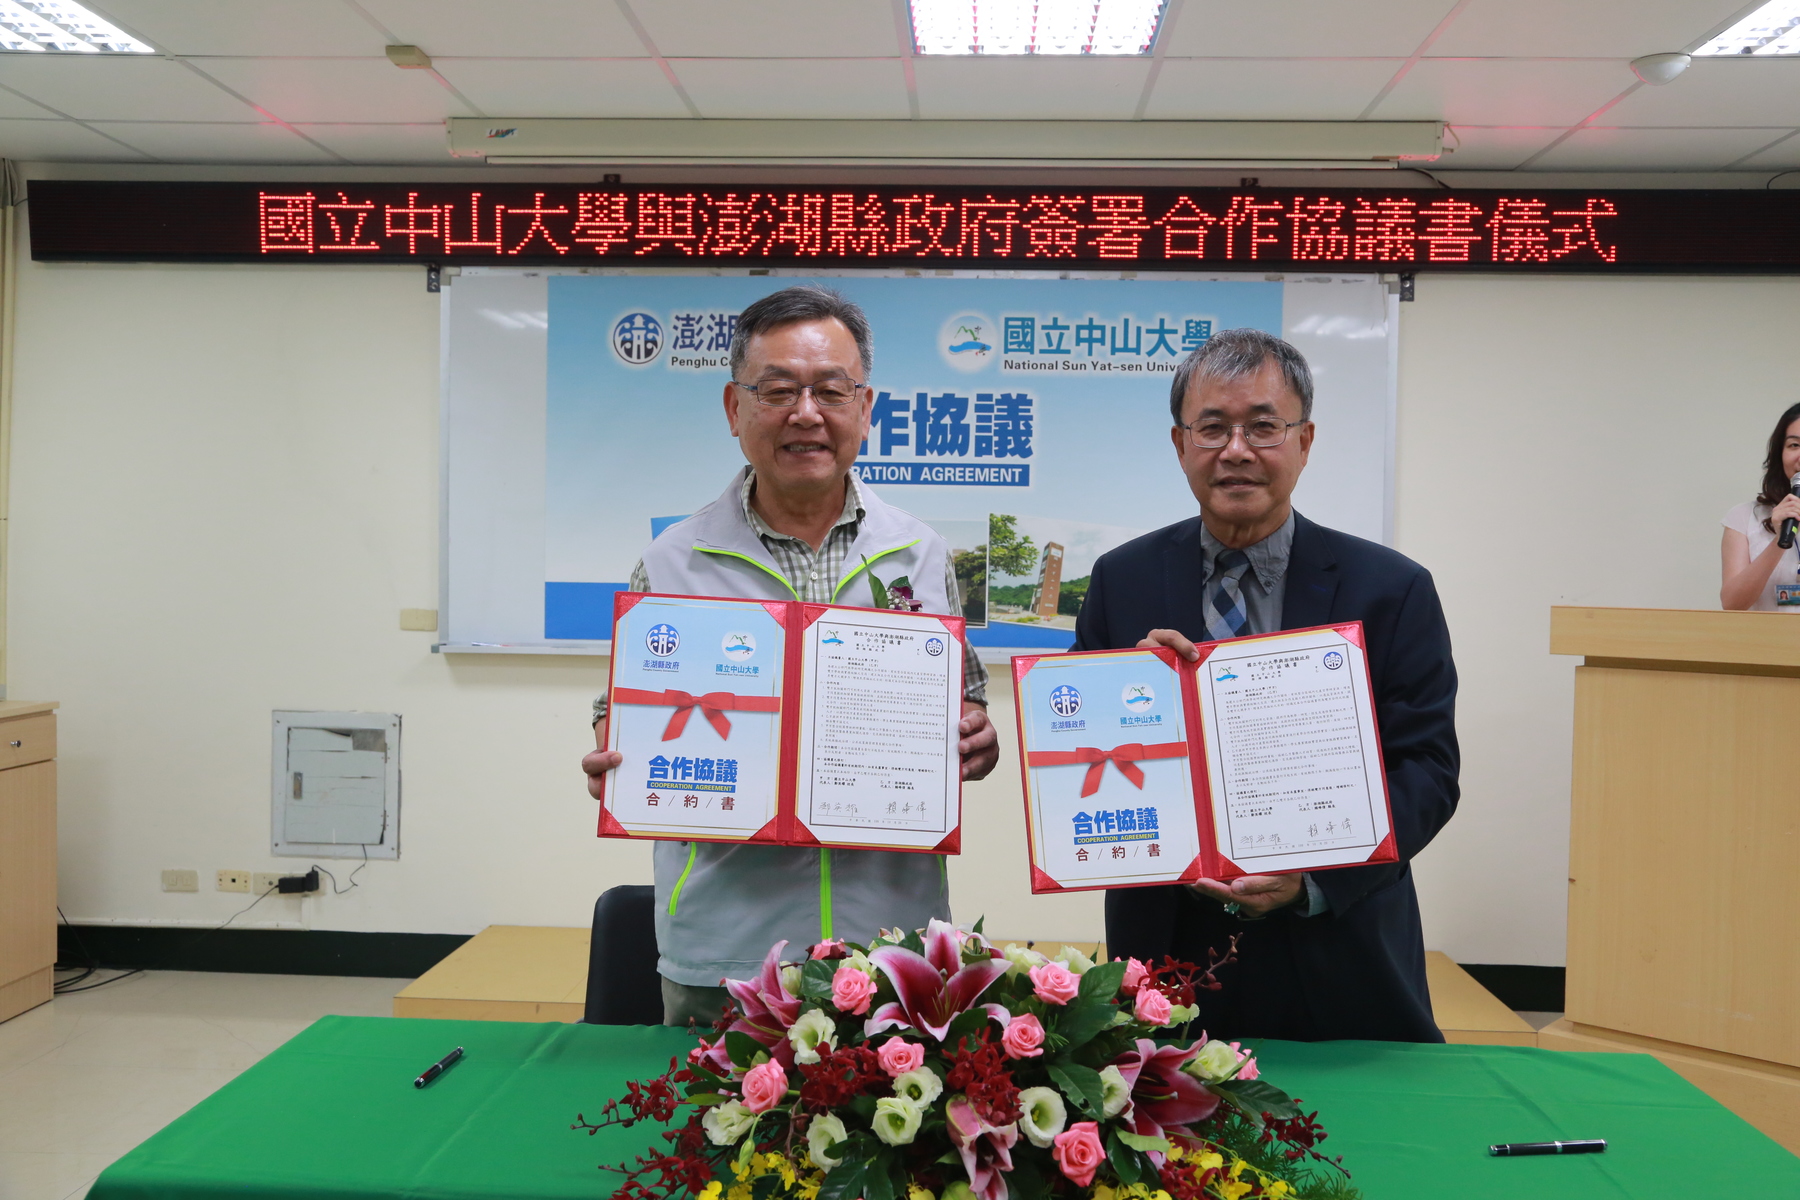 National Sun Yat-sen University and Penghu County Government announced their collaboration in healthcare professionals’ cultivation. NSYSU President Ying-Yao Cheng (right) and Penghu County Mayor Feng-Wei Lai (left) signed an agreement on collaboration.